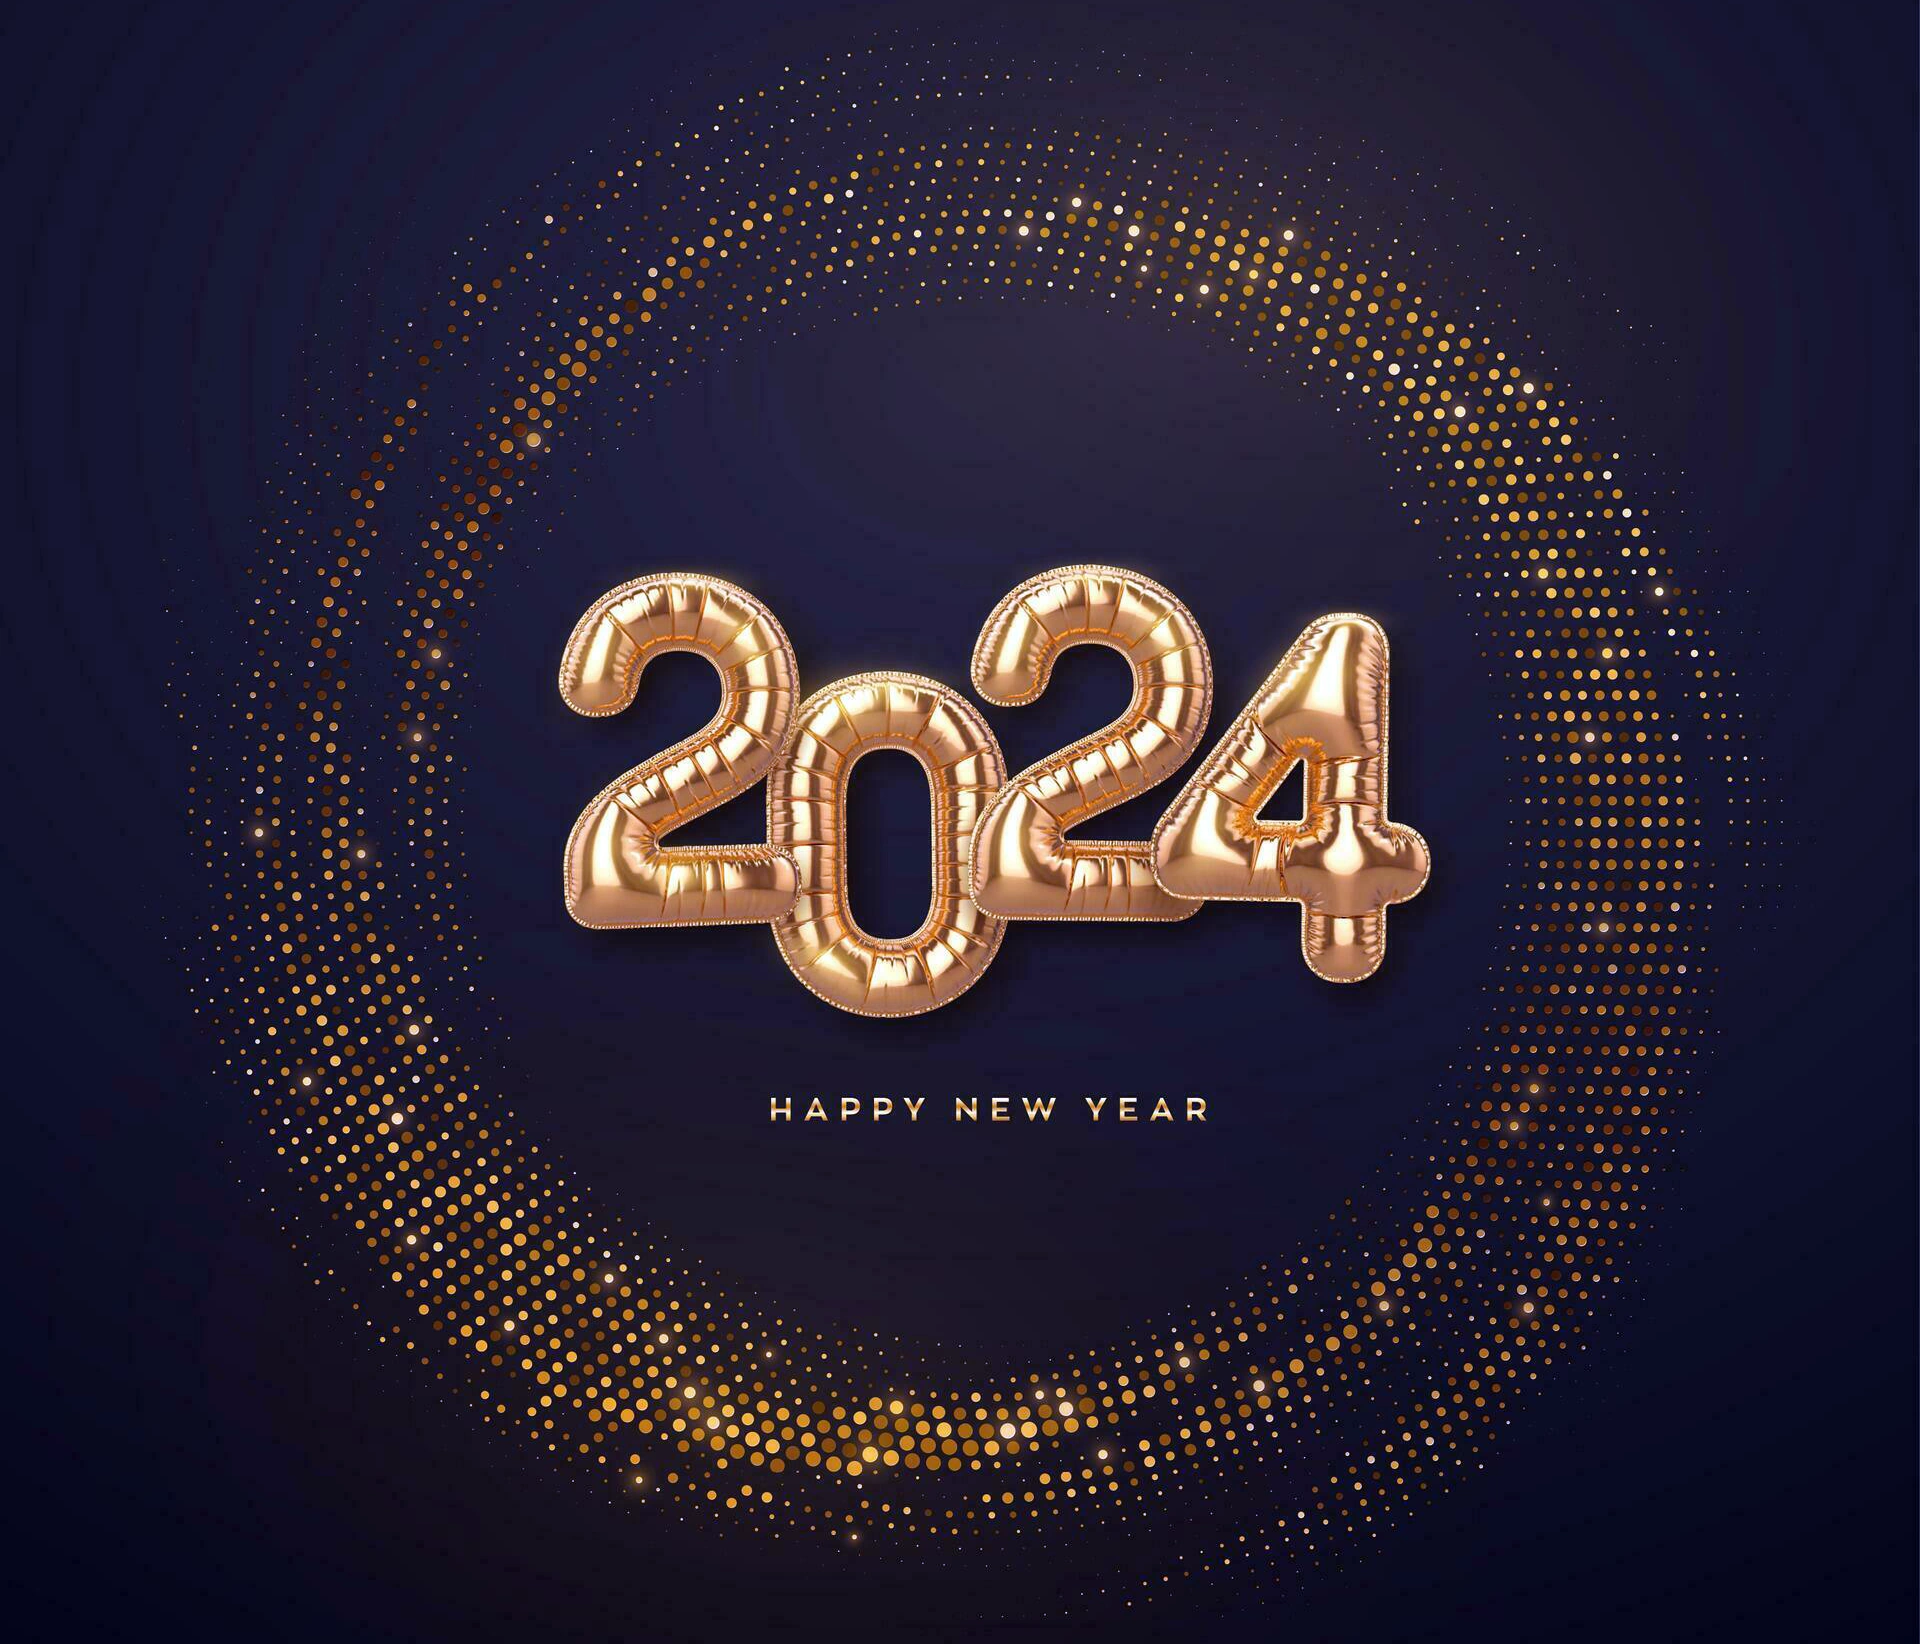 Happy new year 2023 with golden balloon numbers